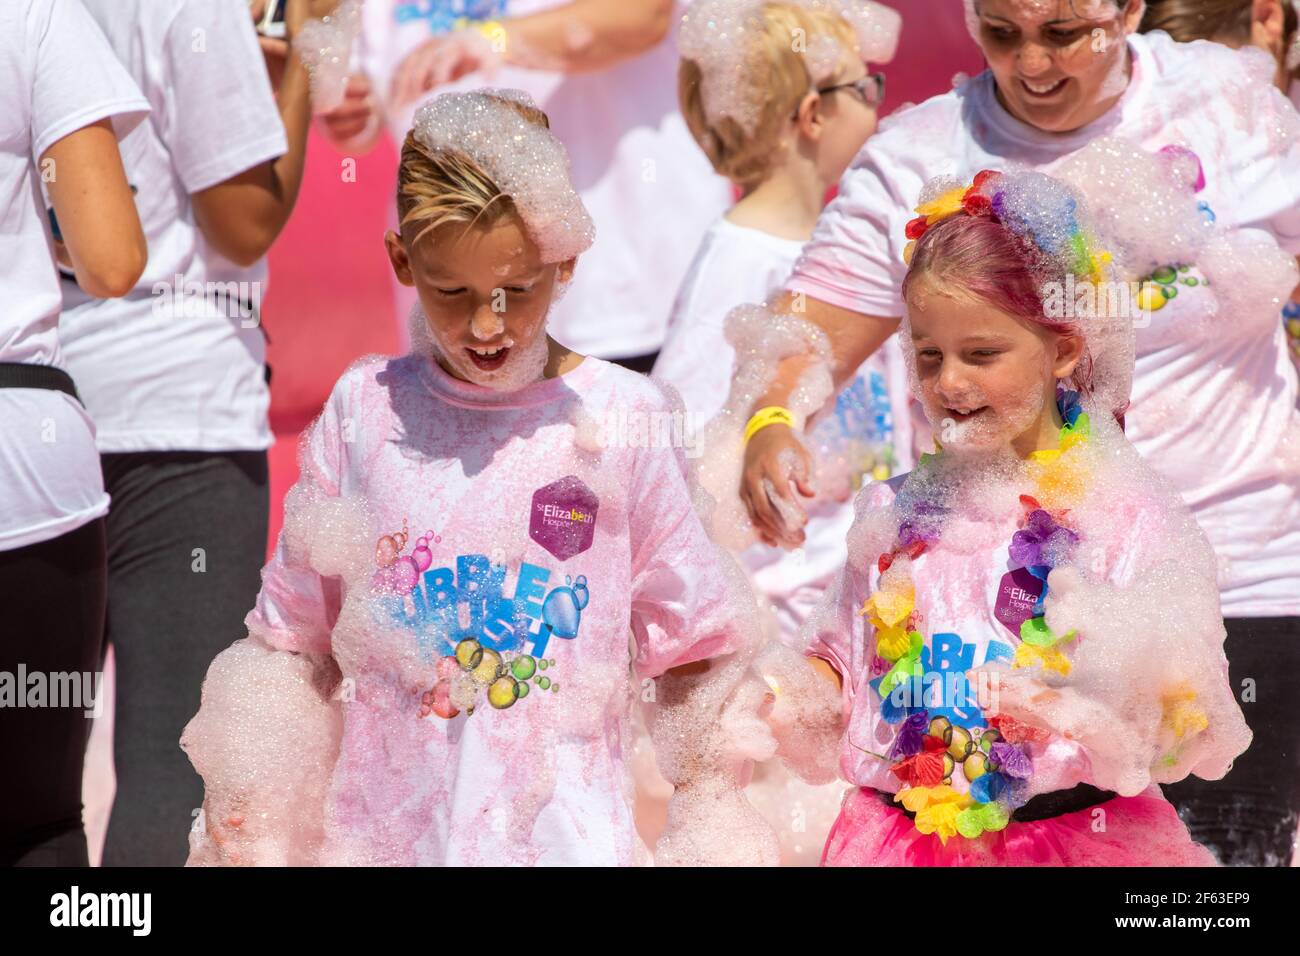 Boy and girl covered in pink foam at a charity fundraiser Stock Photo